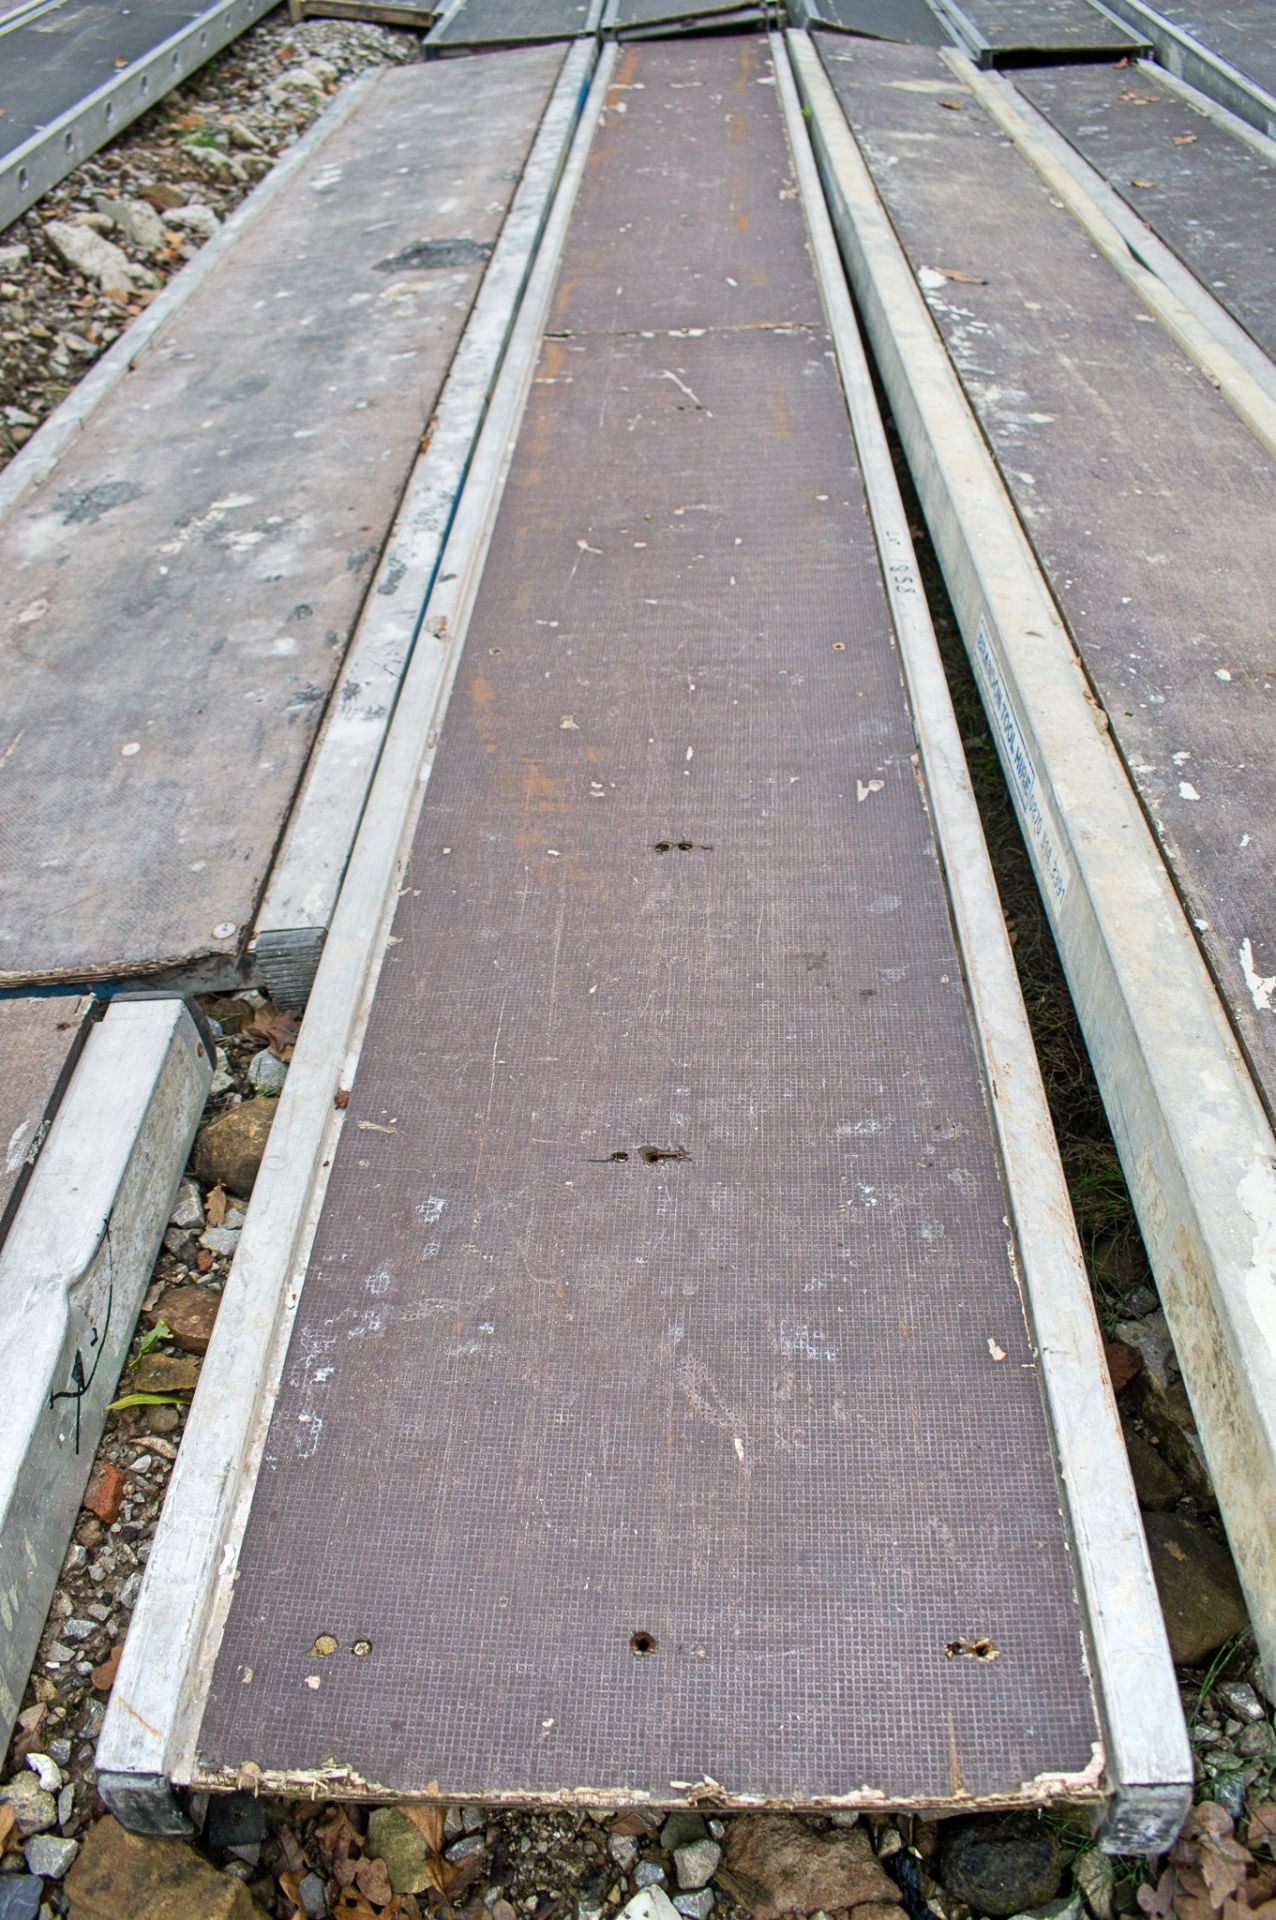 Aluminium staging board approximately 14ft long